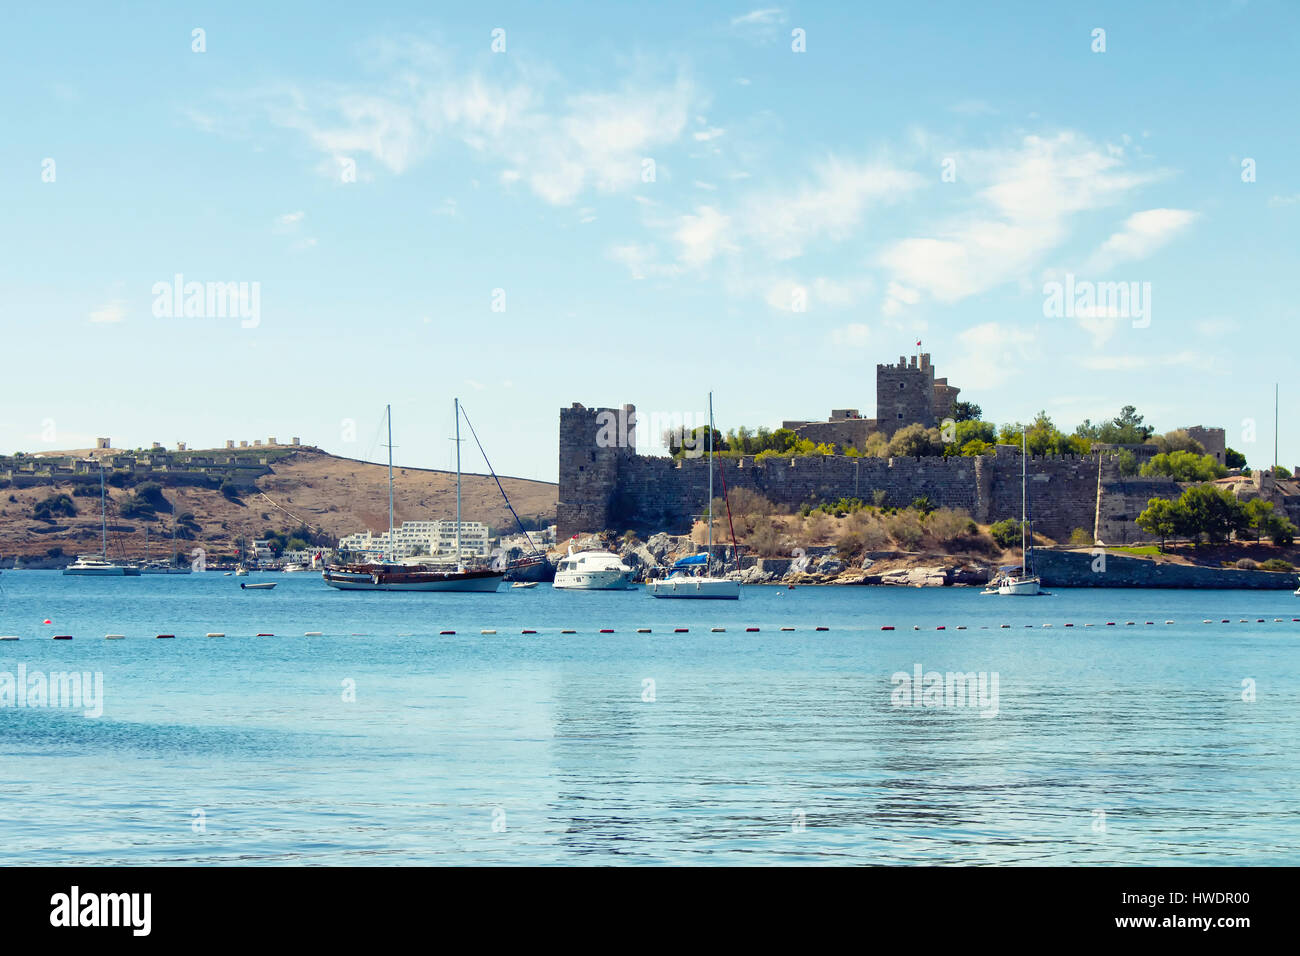 Luxury yachts (sailing boats) parked on turquoise water in front of Bodrum castle. The image shows Aegean and Mediterranean culture of coastel lifesty Stock Photo